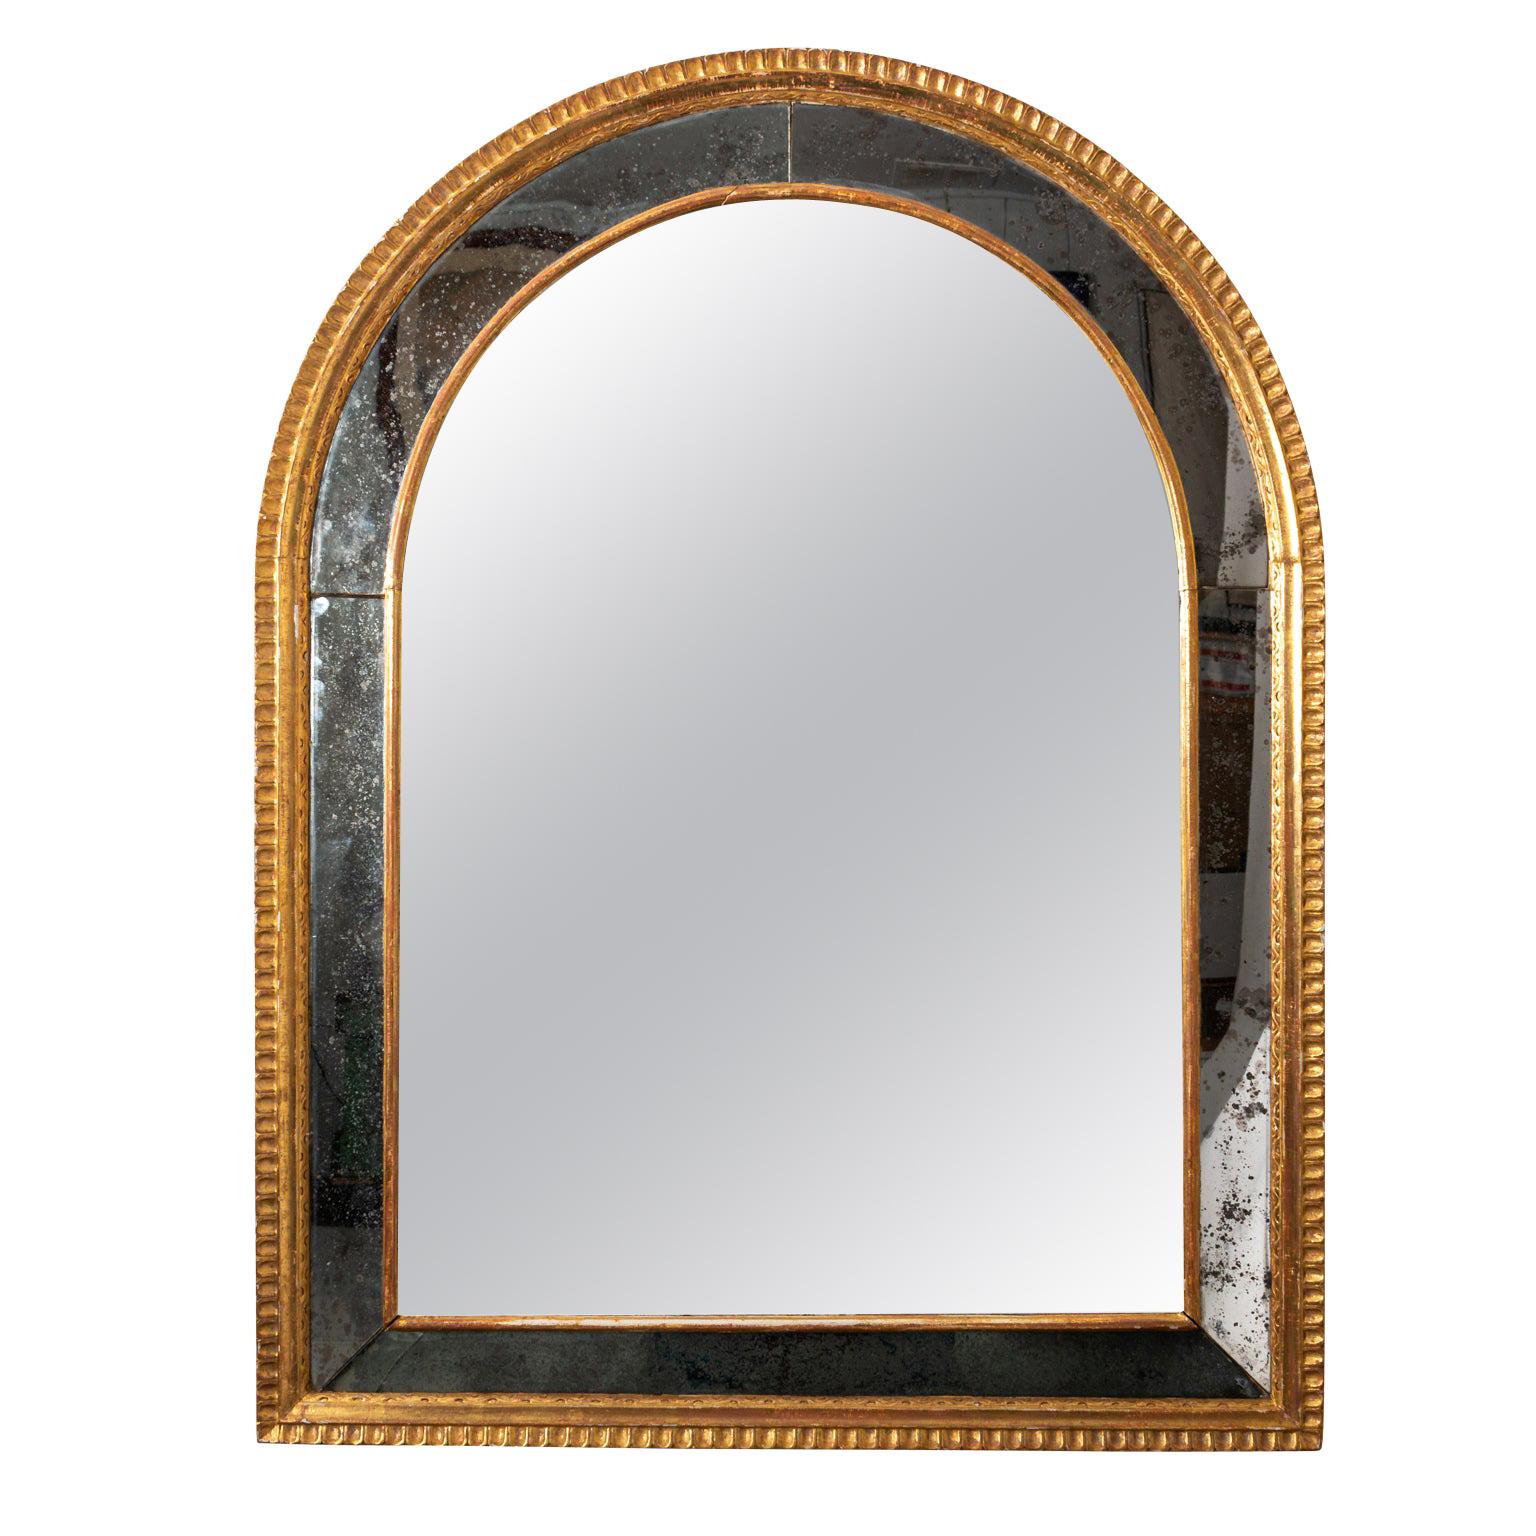 Rounded Arch Mirror